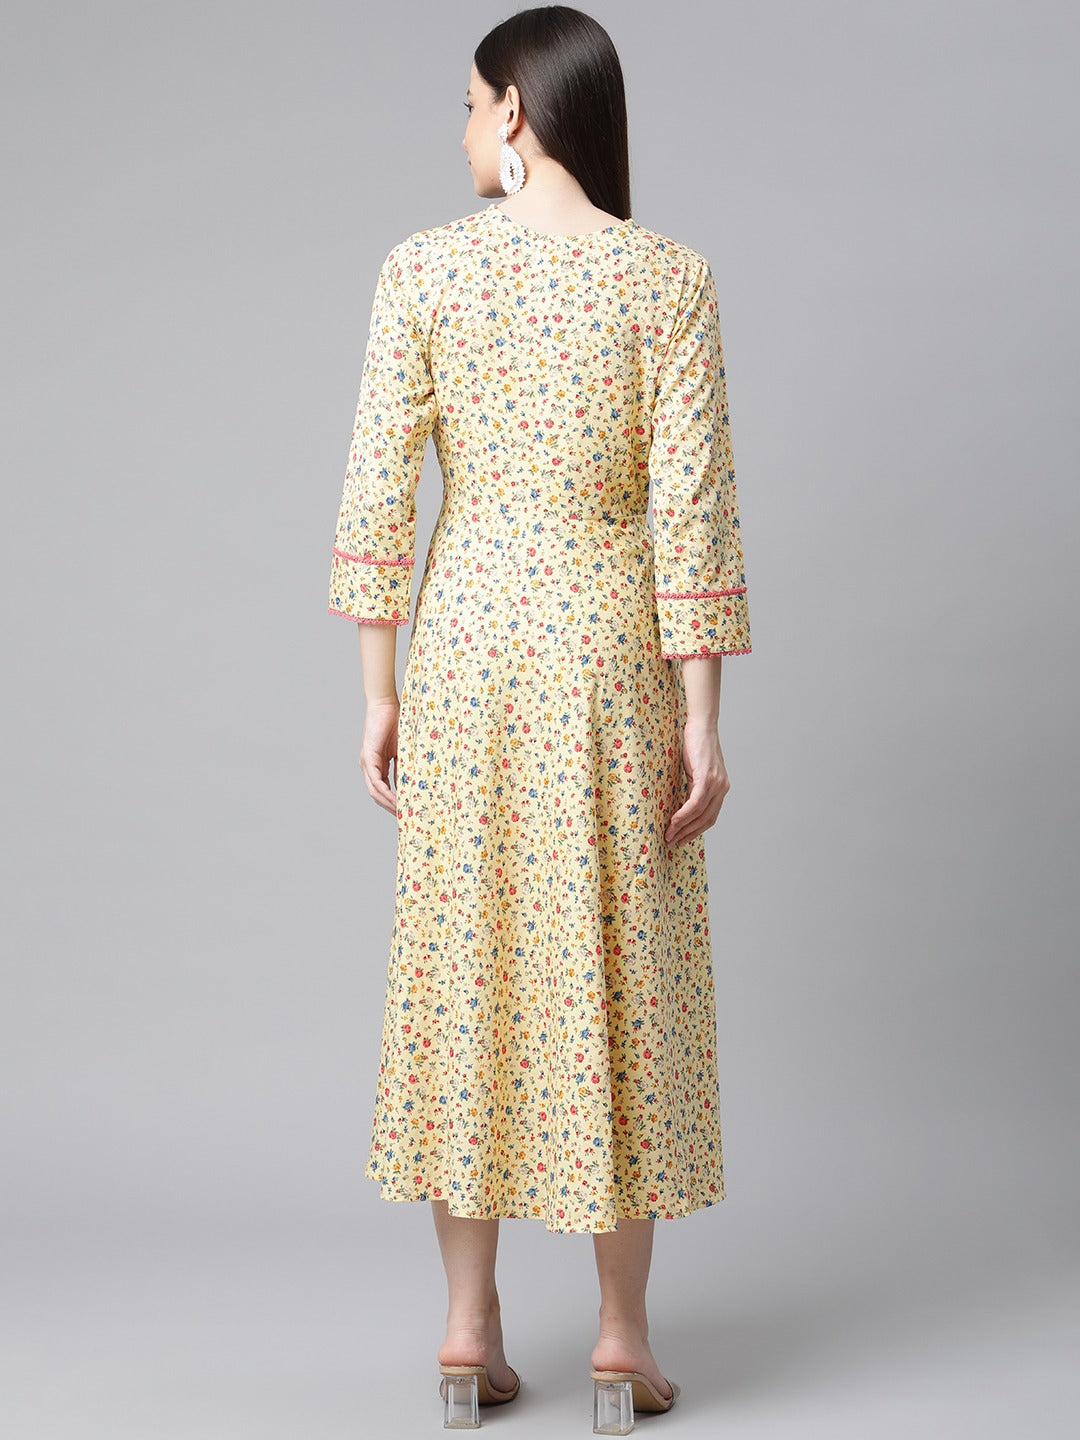 Jompers Yellow Floral printed A-Line kurta